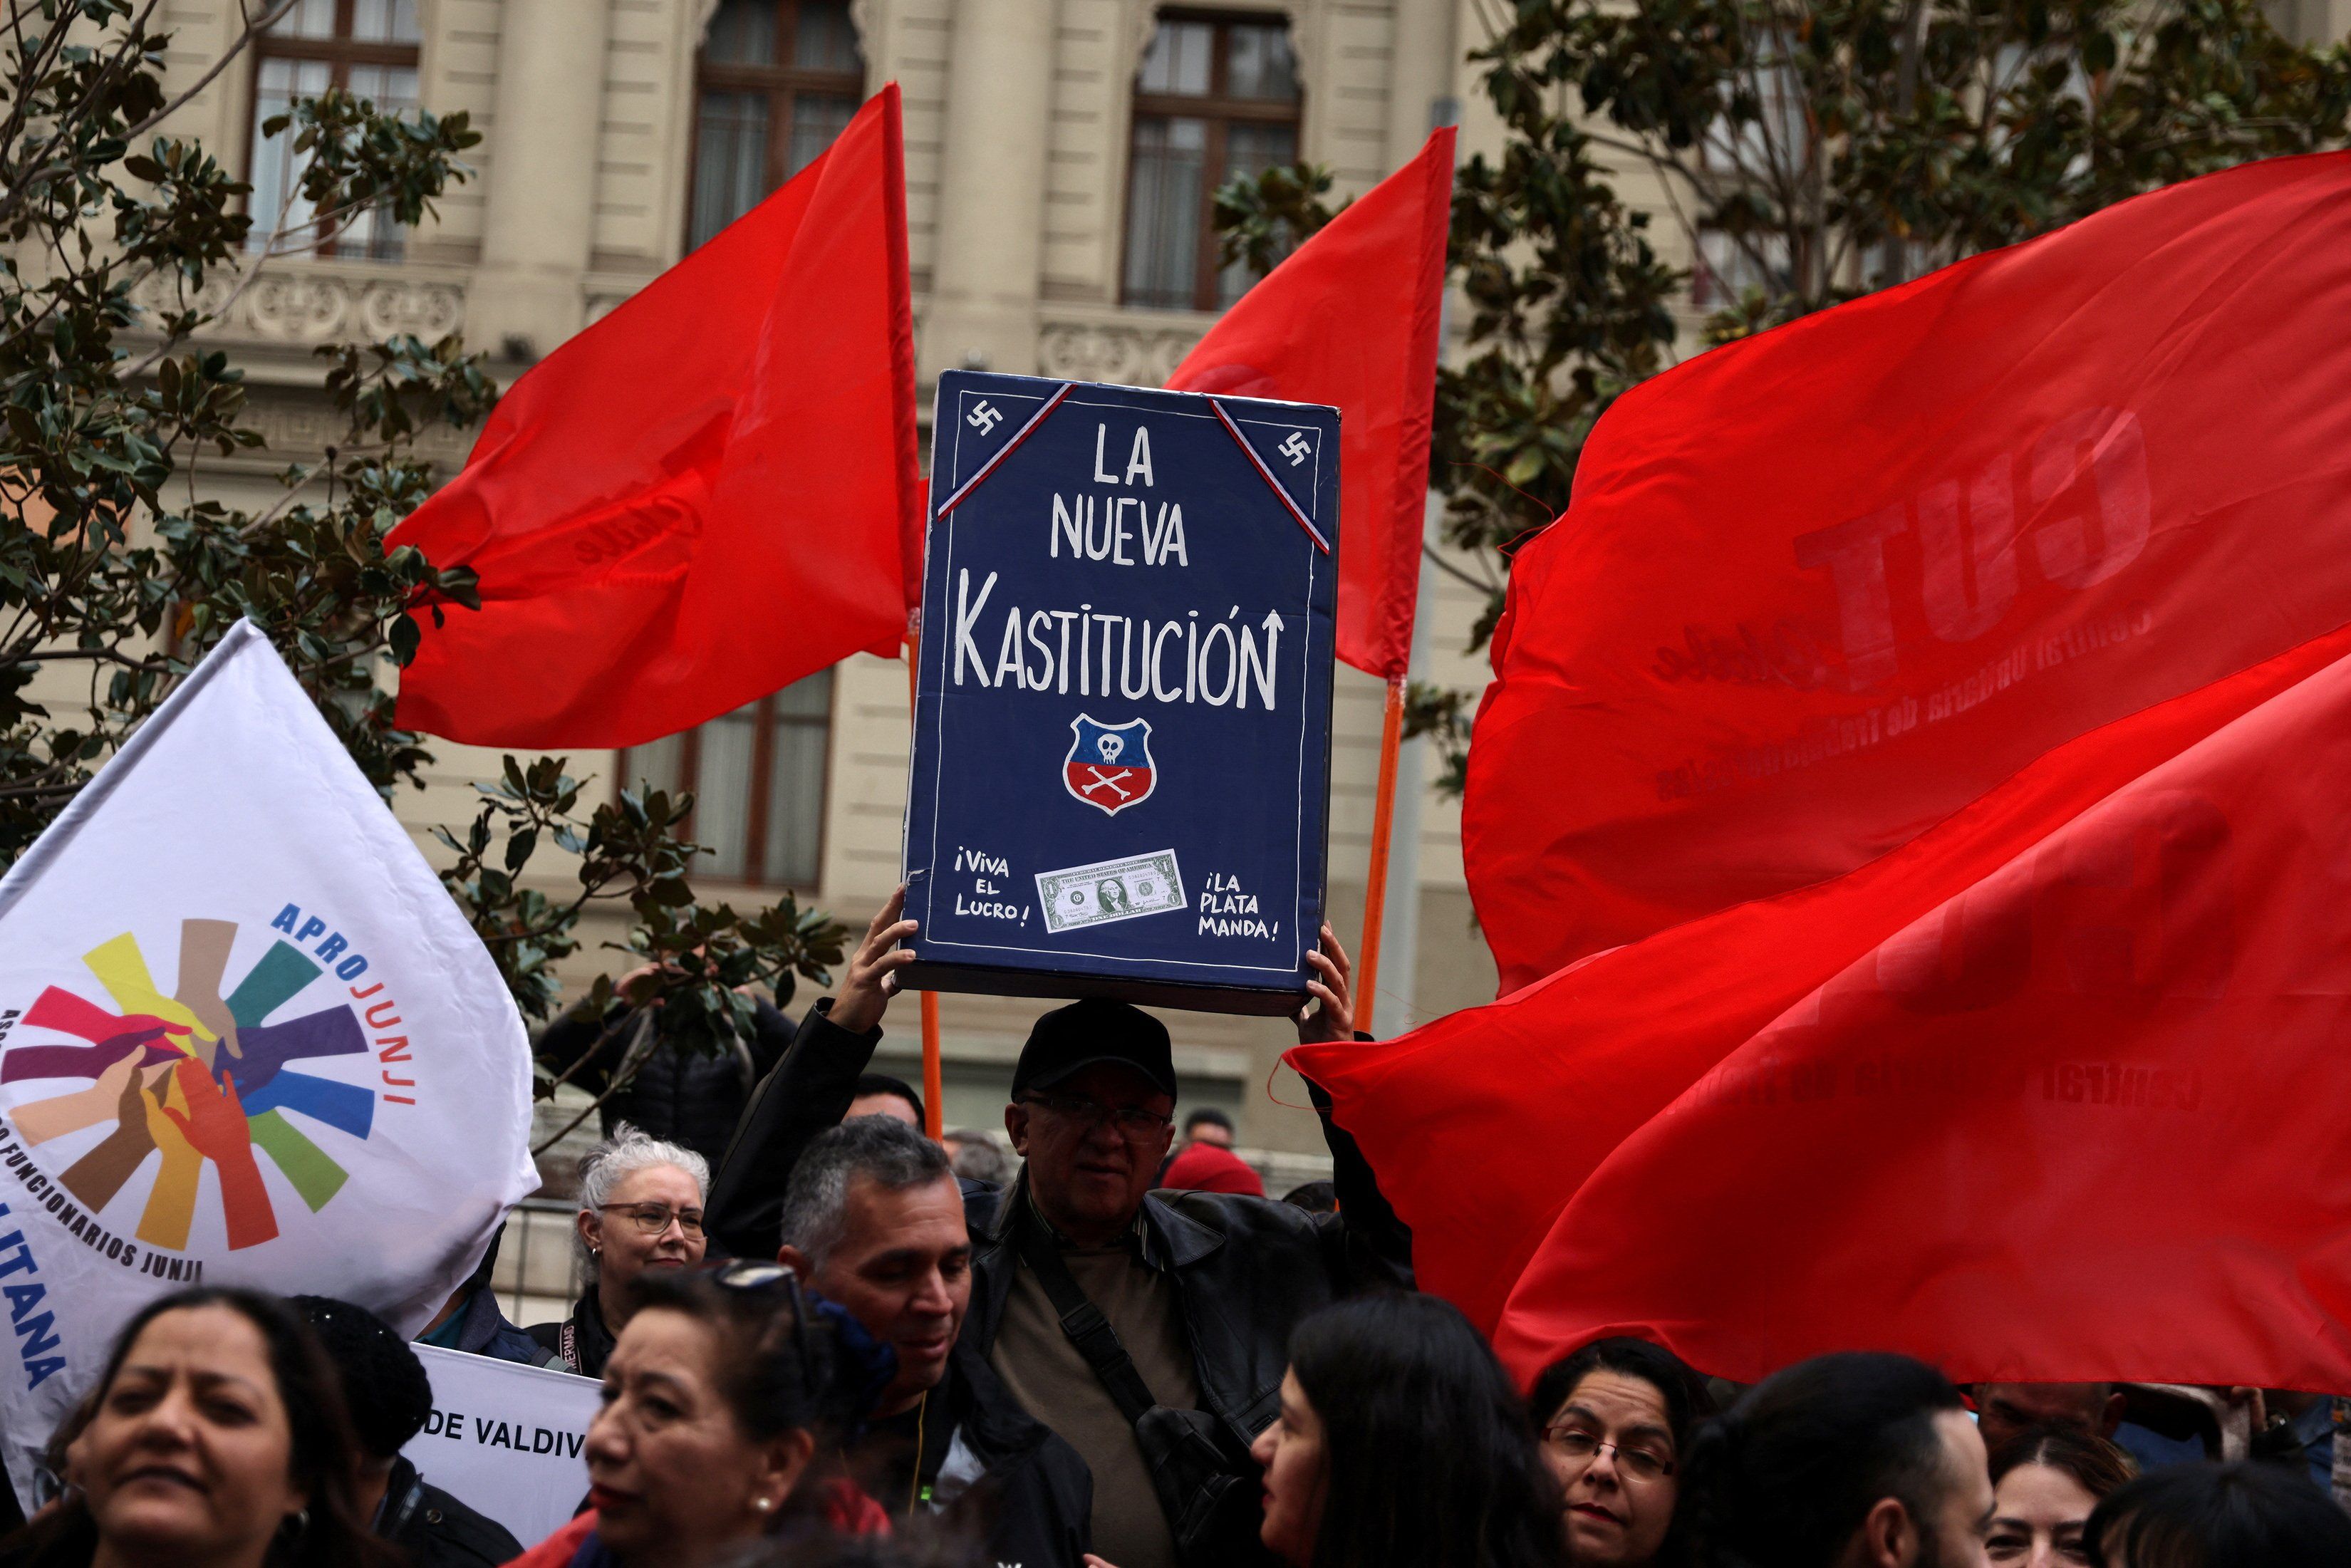 A demonstrator holds up a model depicting a Chilean constitution book that reads 'The new Kastitucion' in a play on the word 'Constitution' and the name of far right-wing politician Jose Antonio Kast, while protesting against ongoing Constitutional process lead by right-wing parties, in Santiago, Chile, October 3, 2023.